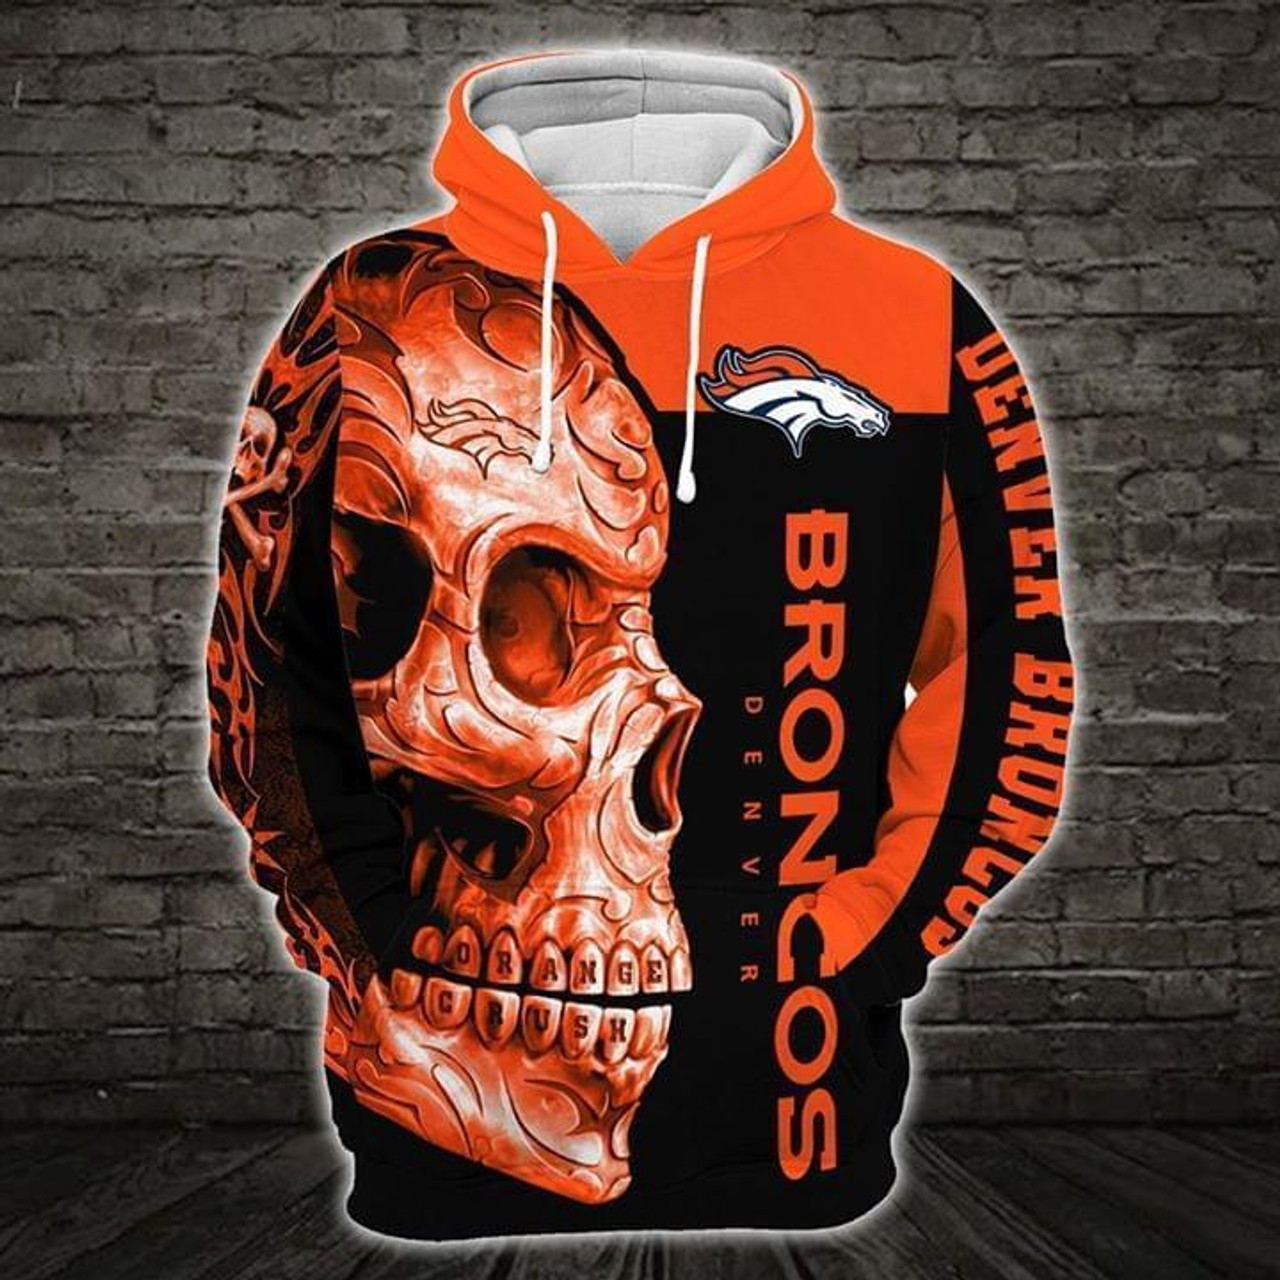 **(OFFICIAL-N.F.L.DENVER-BRONCOS-PULLOVER-HOODIES/BIG-AZTEC-BRONCOS-TRIBAL-SKULL/OFFICIAL-CUSTOM-3D-BRONCOS-LOGOS & OFFICIAL-BRONCOS-TEAM-COLORS/CUSTOM-3D-GRAPHIC-PRINTED-DOUBLE-SIDED-DESIGN/WARM-PREMIUM-N.F.L.BRONCOS-TEAM-PULLOVER-HOODIES)**